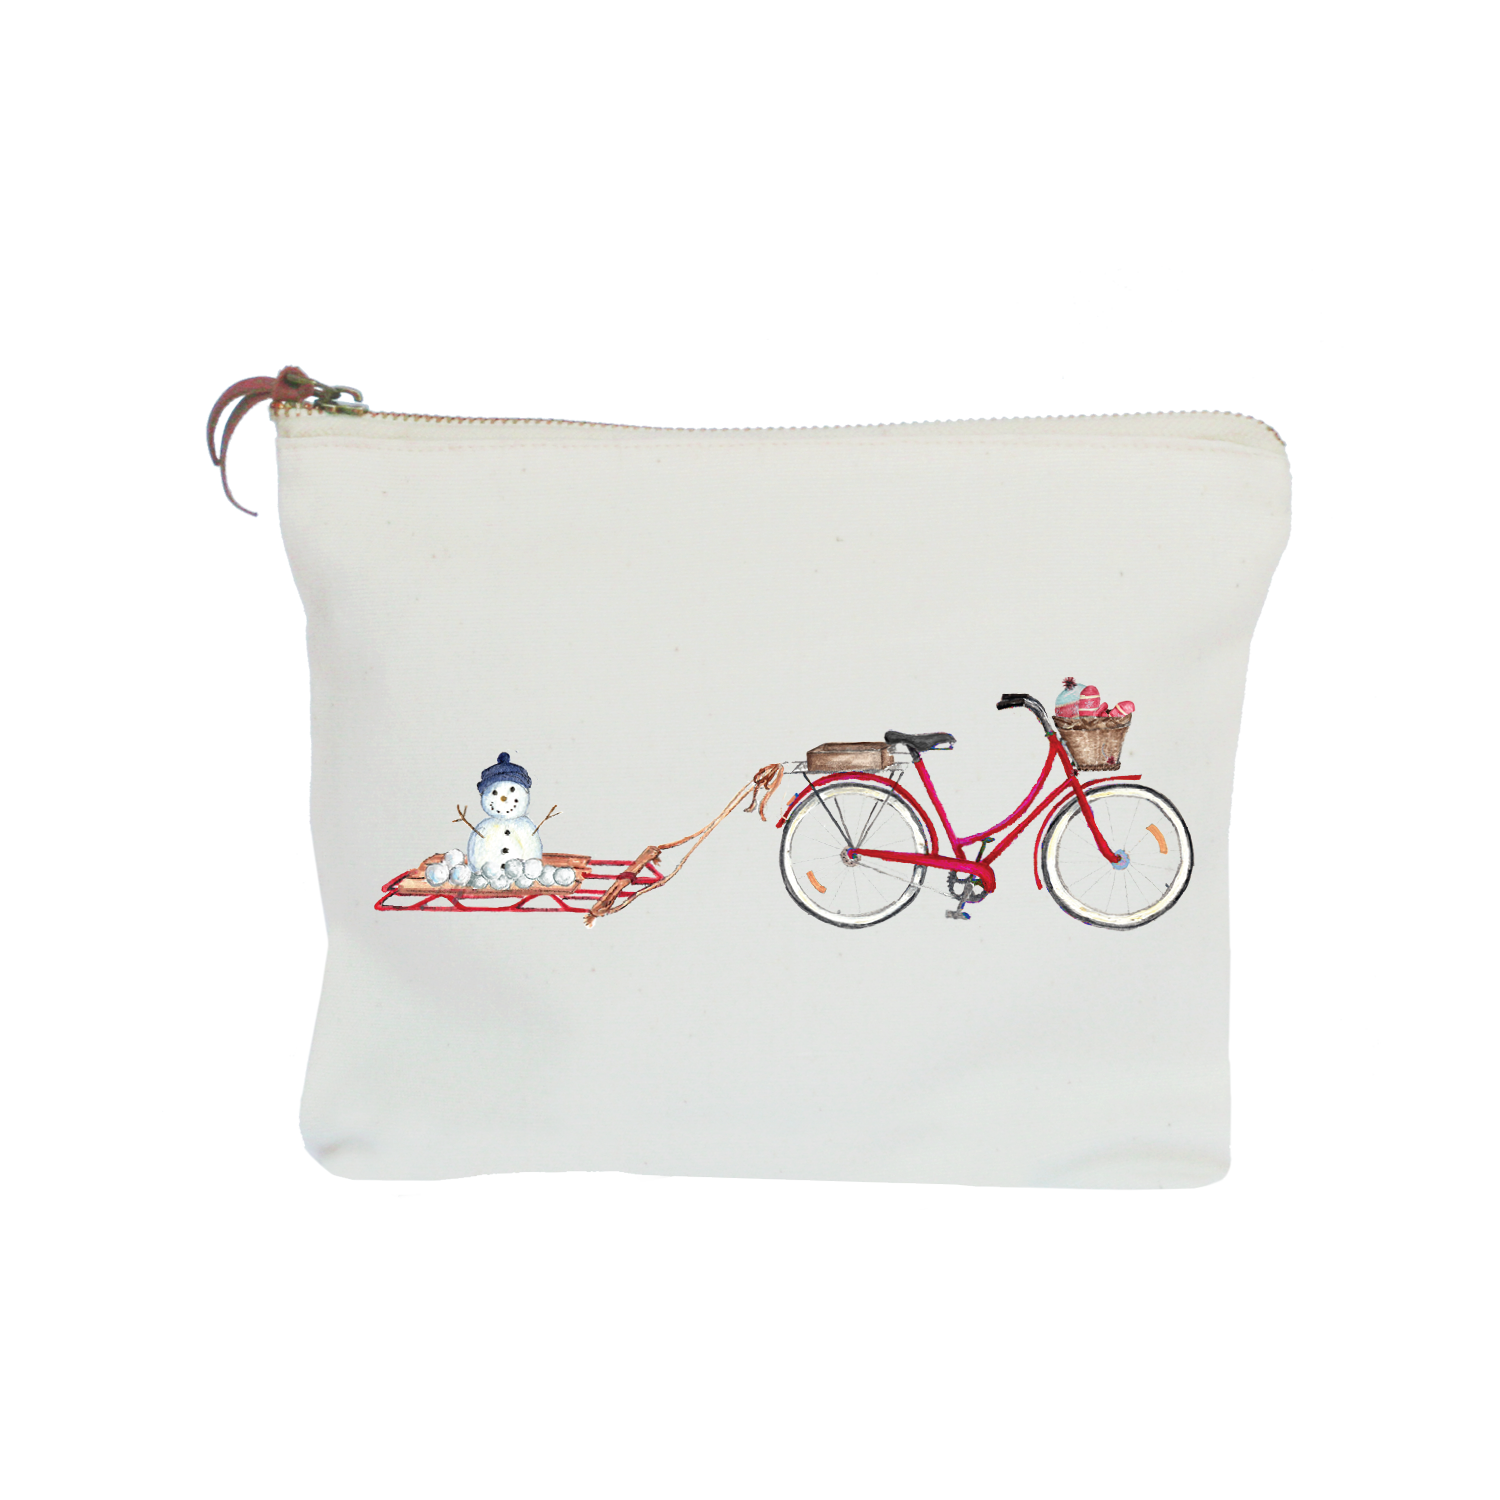 red bike with snowman on sled zipper pouch